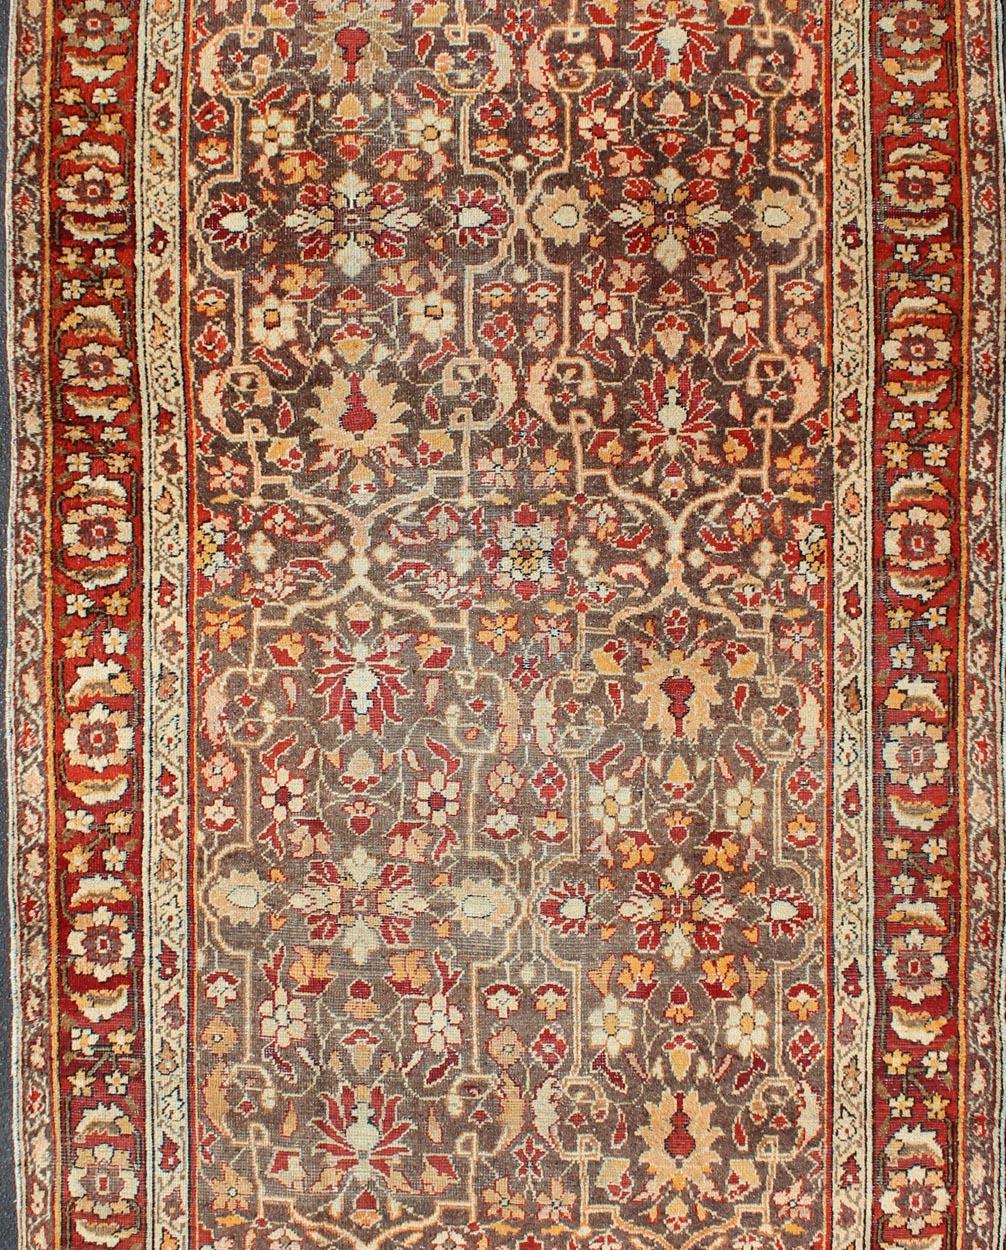 Antique Sultanabad short gallery rug with colorful, bold design, rug 19-0602, country of origin / type: Iran / Mahal, circa 1900

This antique Persian Sultanabad carpet features Colors such as Gray, soft Orange red, mauve, brown, ivory, cream, soft